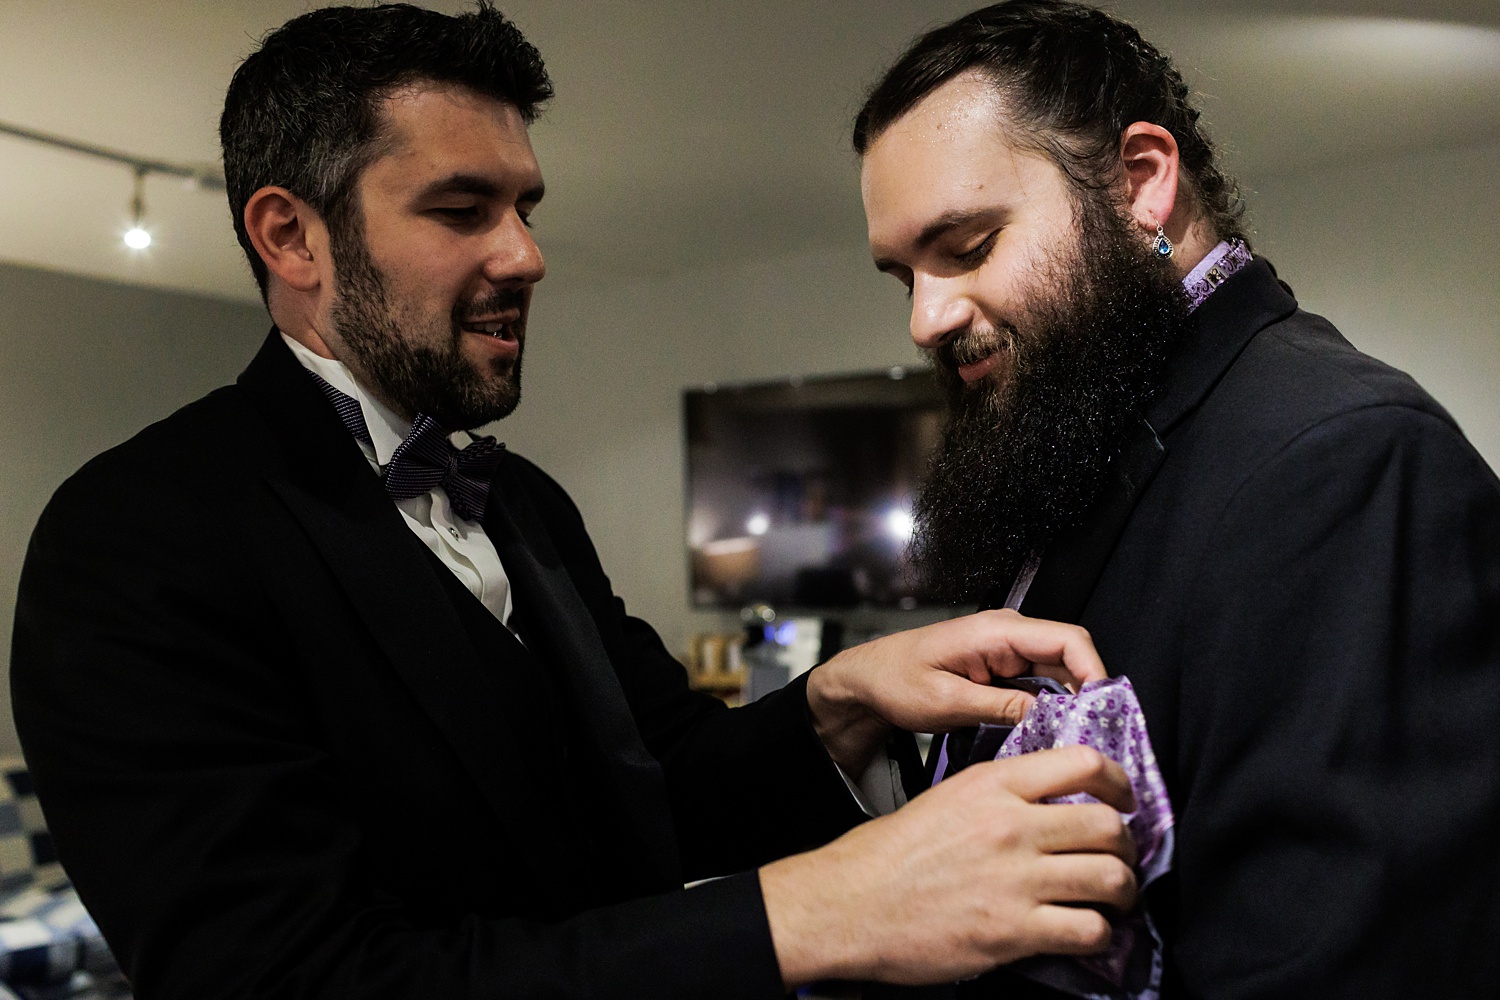 Getting the pocket square figured out